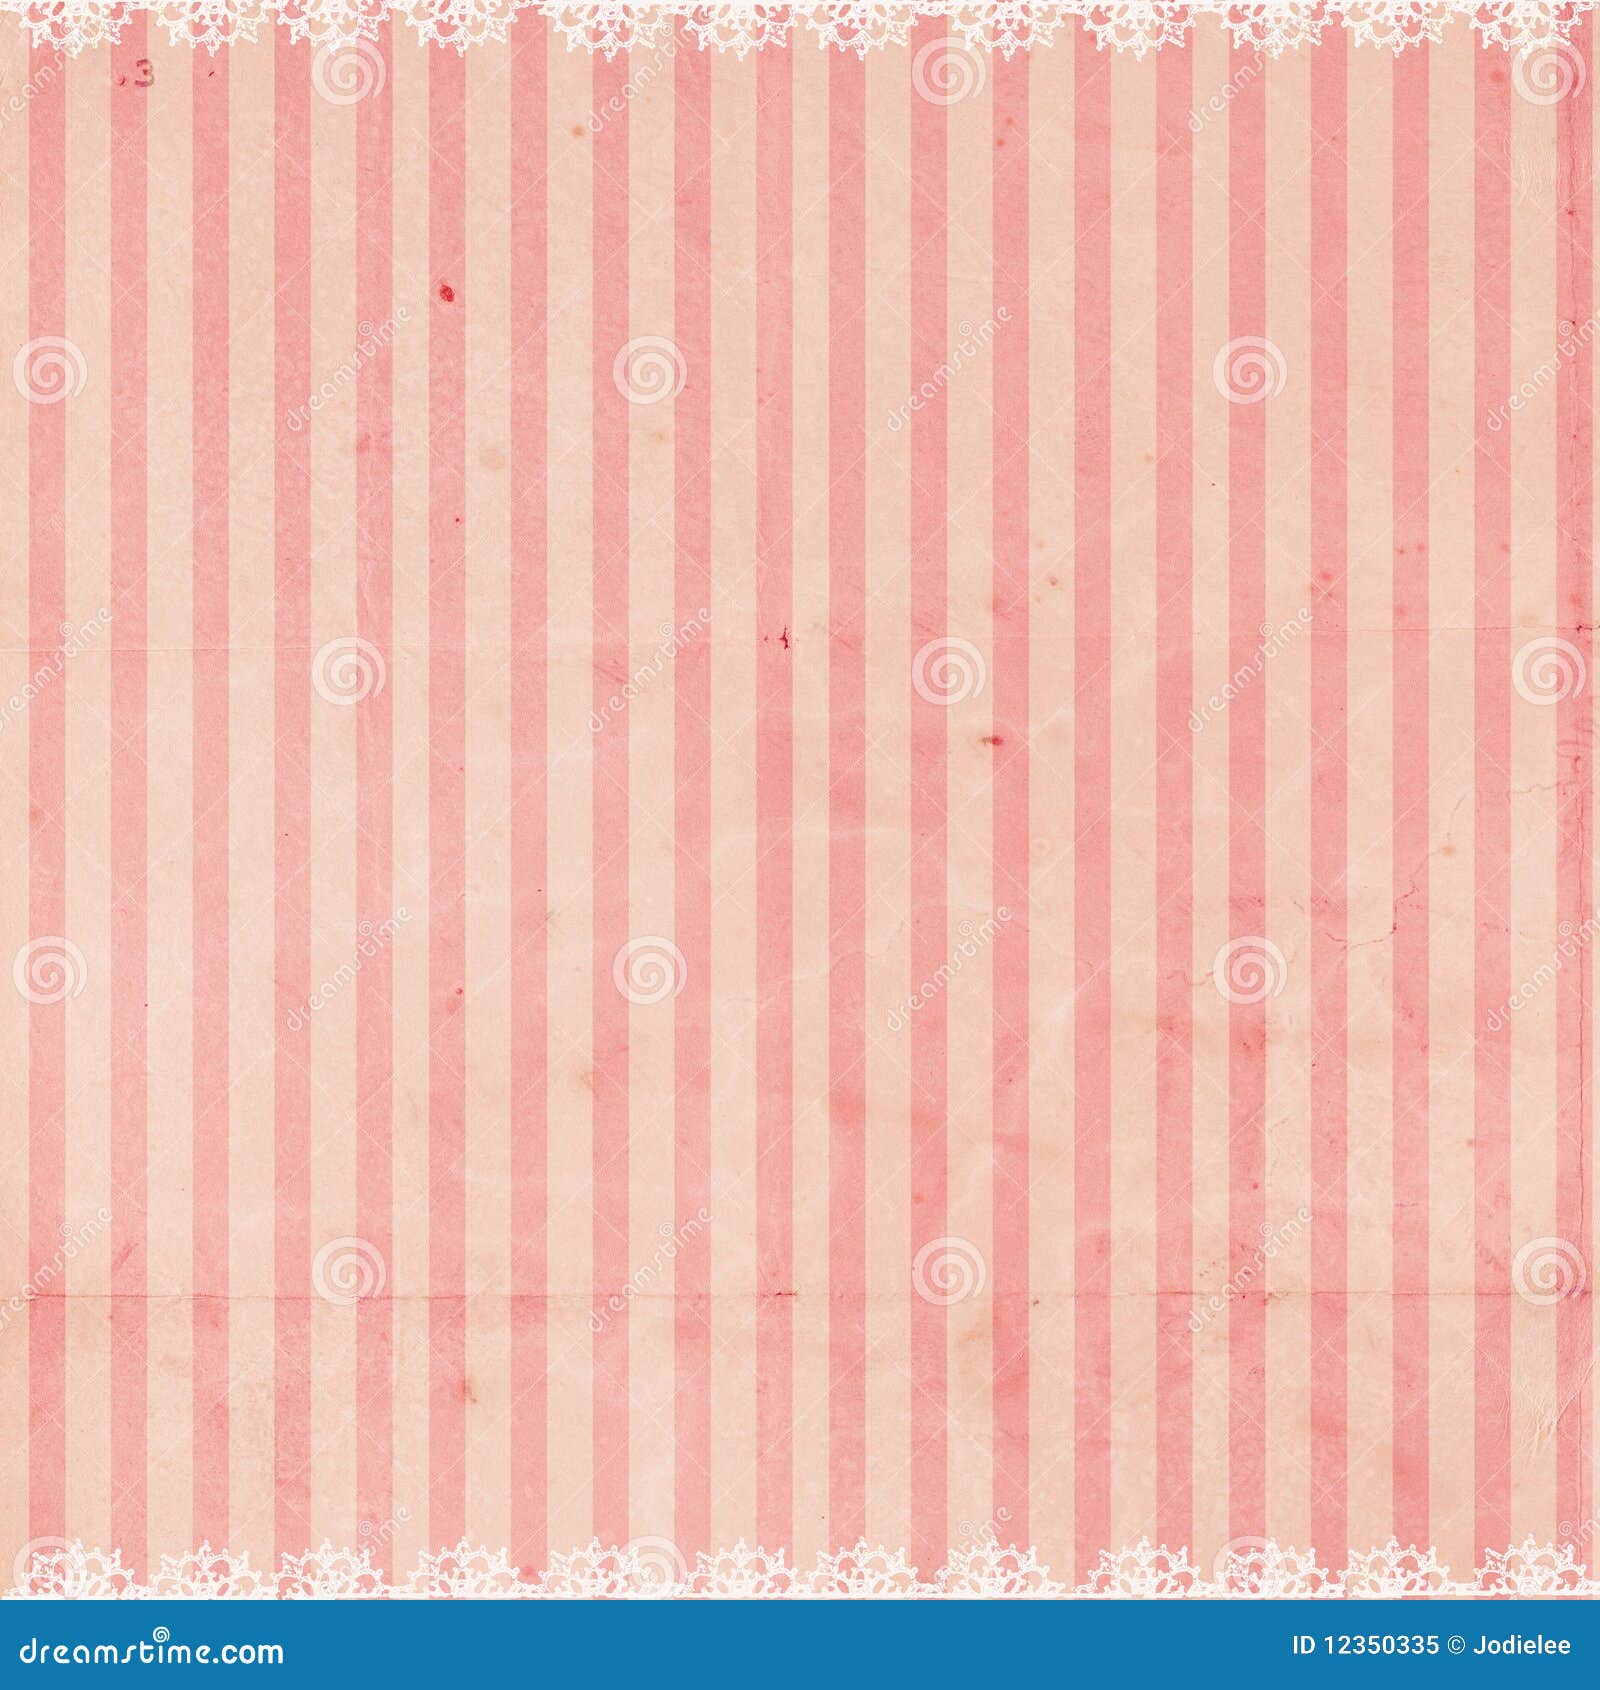 pink striped background with lace trim